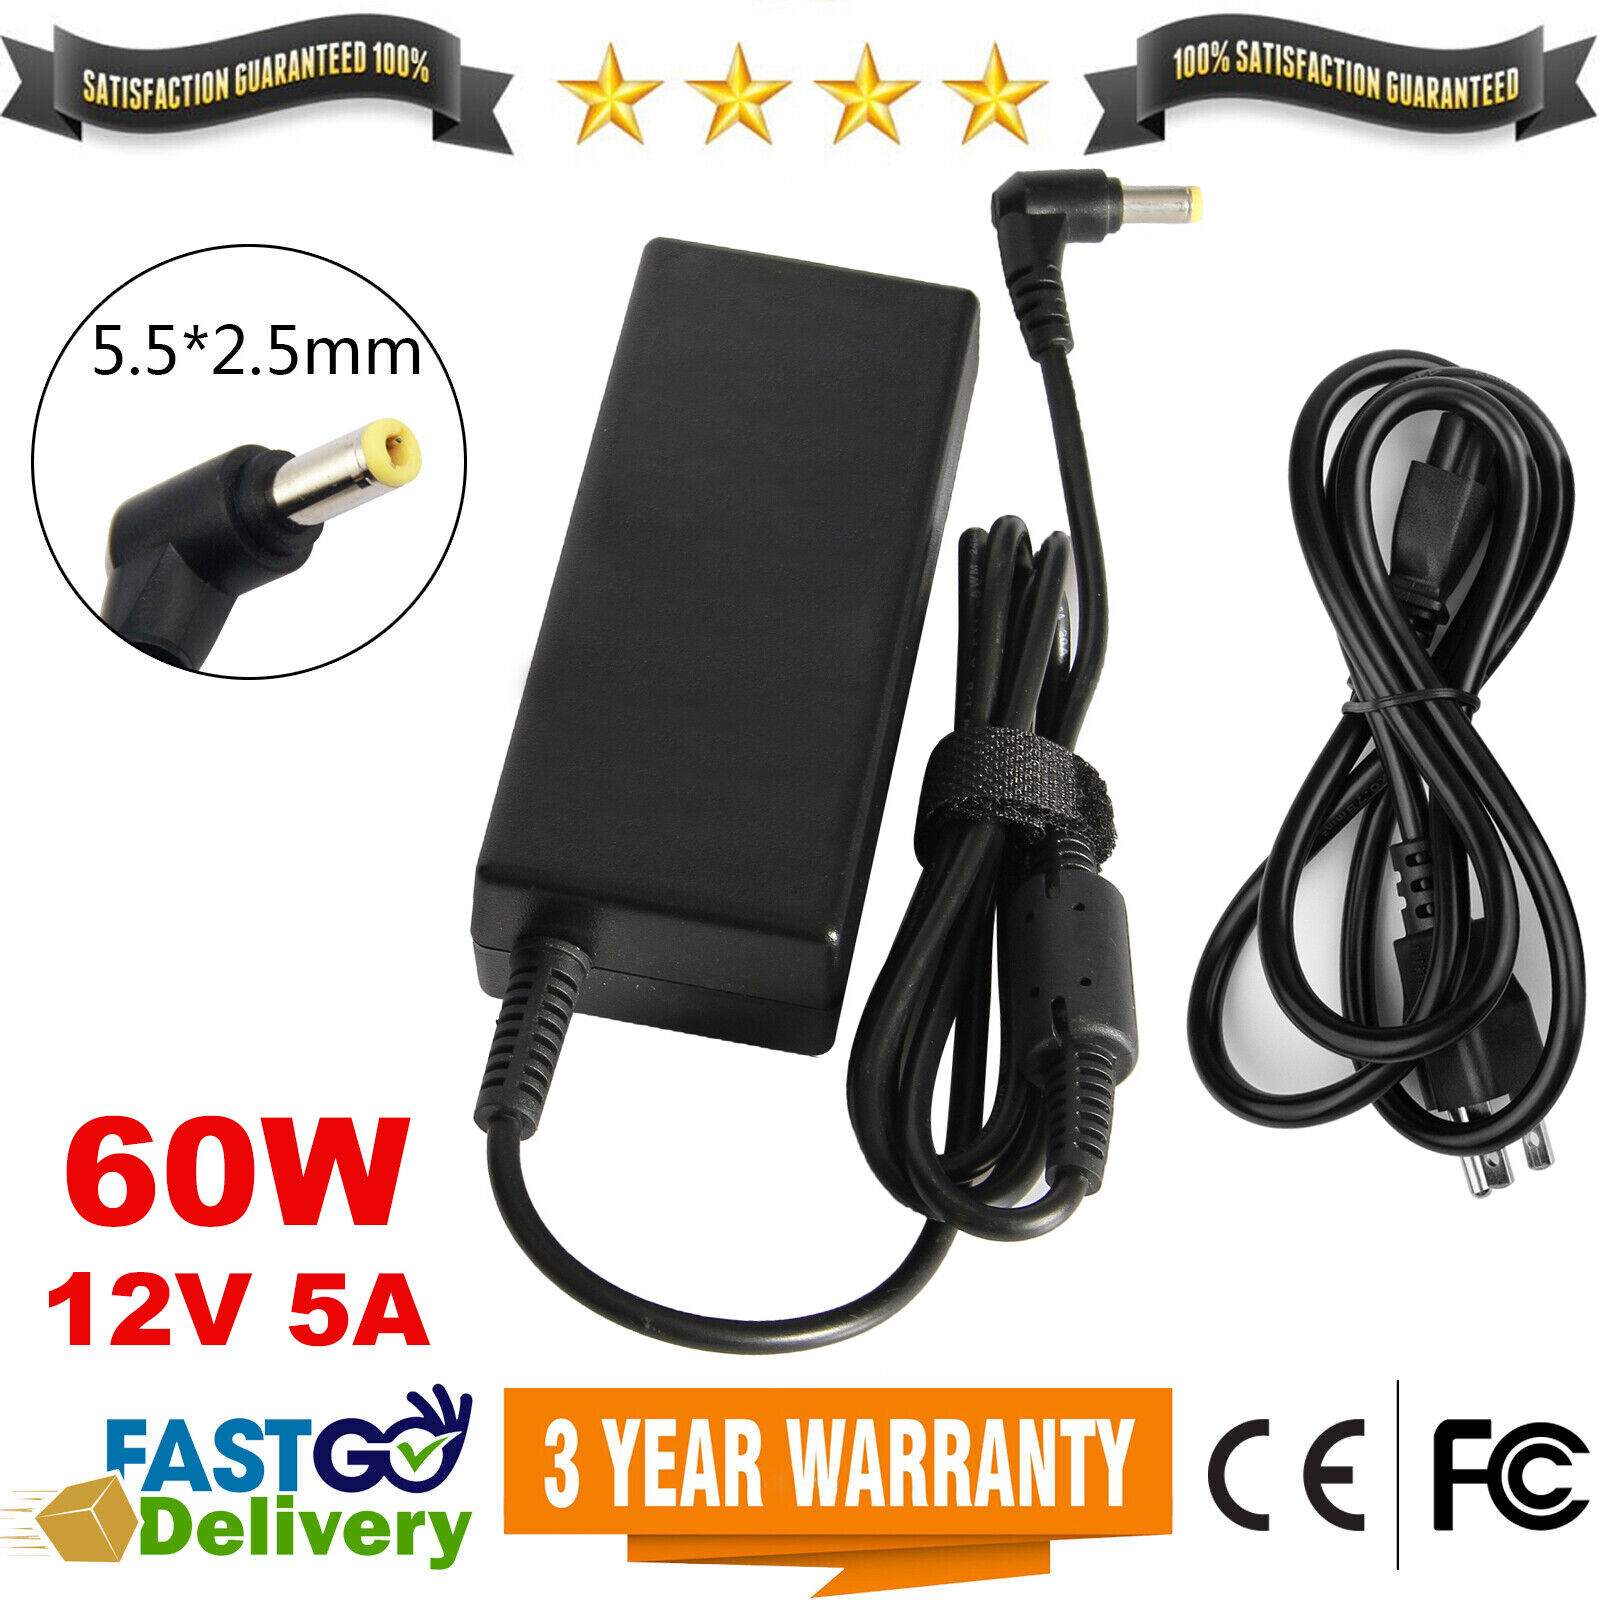 12 Volt 5 Amp (12V 5A) 60W AC Adapter Charger Power Supply Cord FOR LCD Monitors